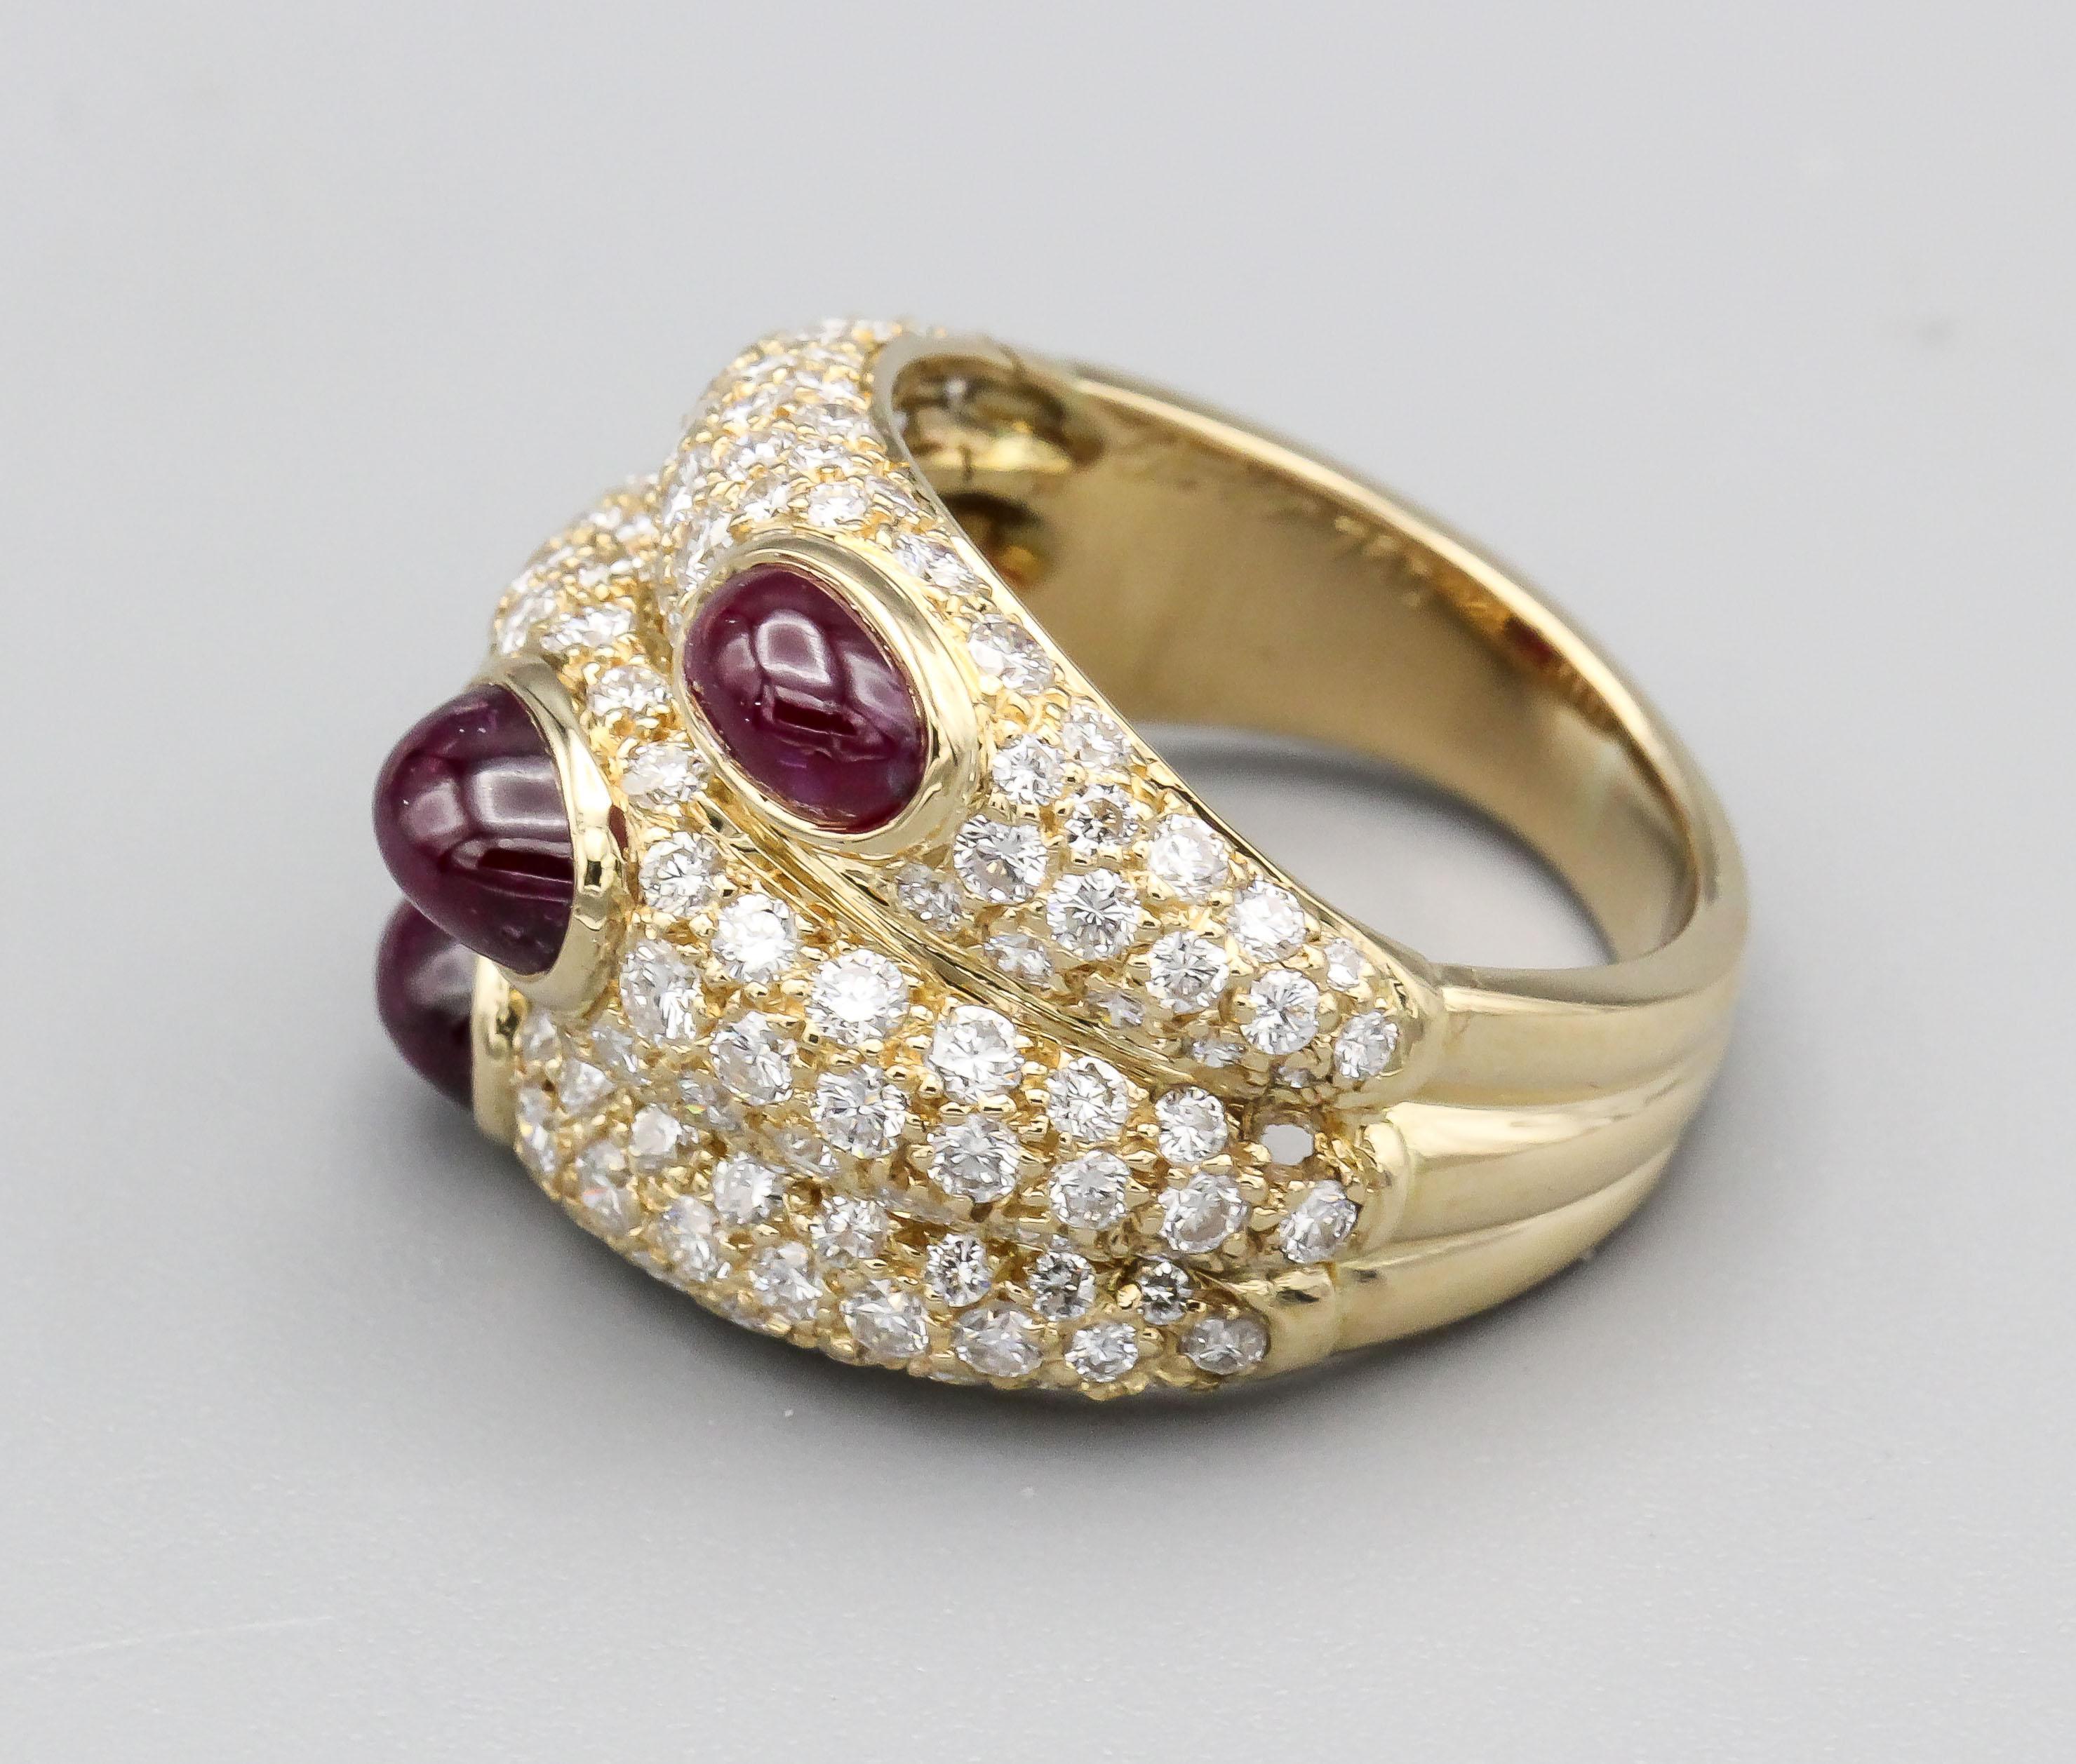 Elegance and opulence converge in the Cartier 18k Gold Ruby Diamond Dome Ring, circa 1980s, a stunning testament to Cartier's mastery of luxury craftsmanship and design. This exquisite ring is a celebration of sophistication, combining the fiery